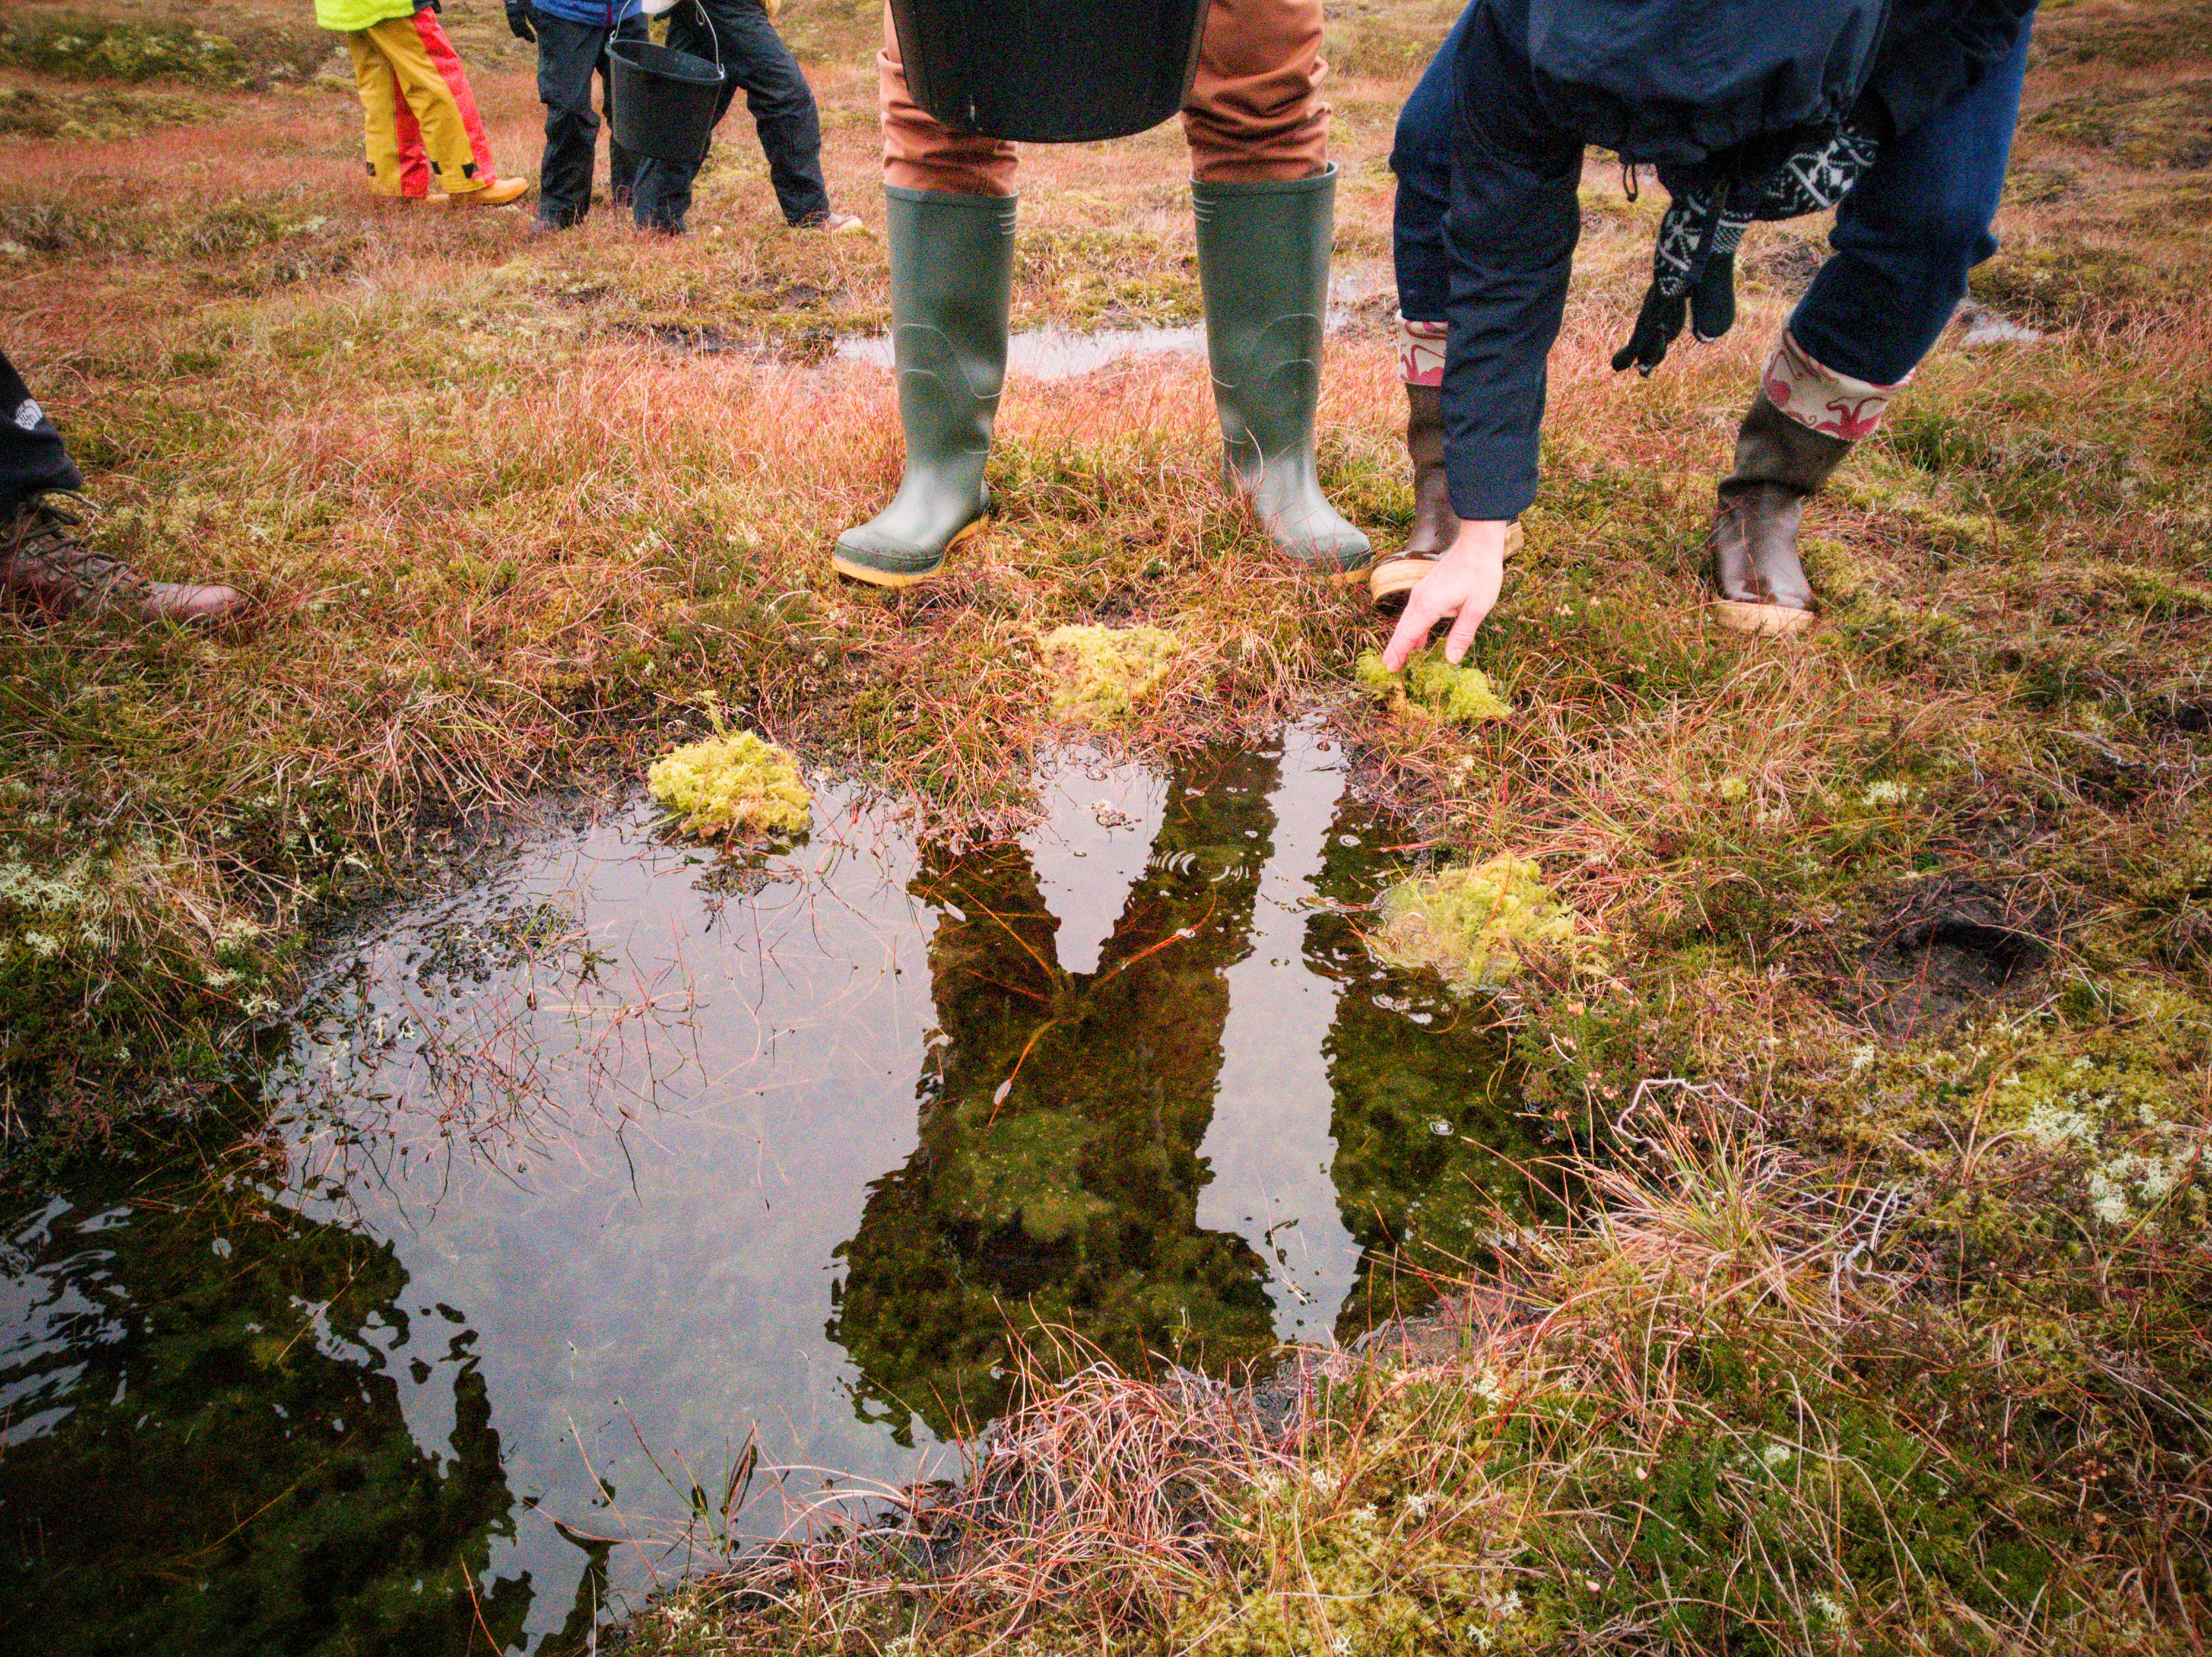 An image of people standing and shown from the waist down in waterproofs and welly boots, looking at the moss on an area of peatland. Some are carrying buckets and one is crouching to touch the moss.